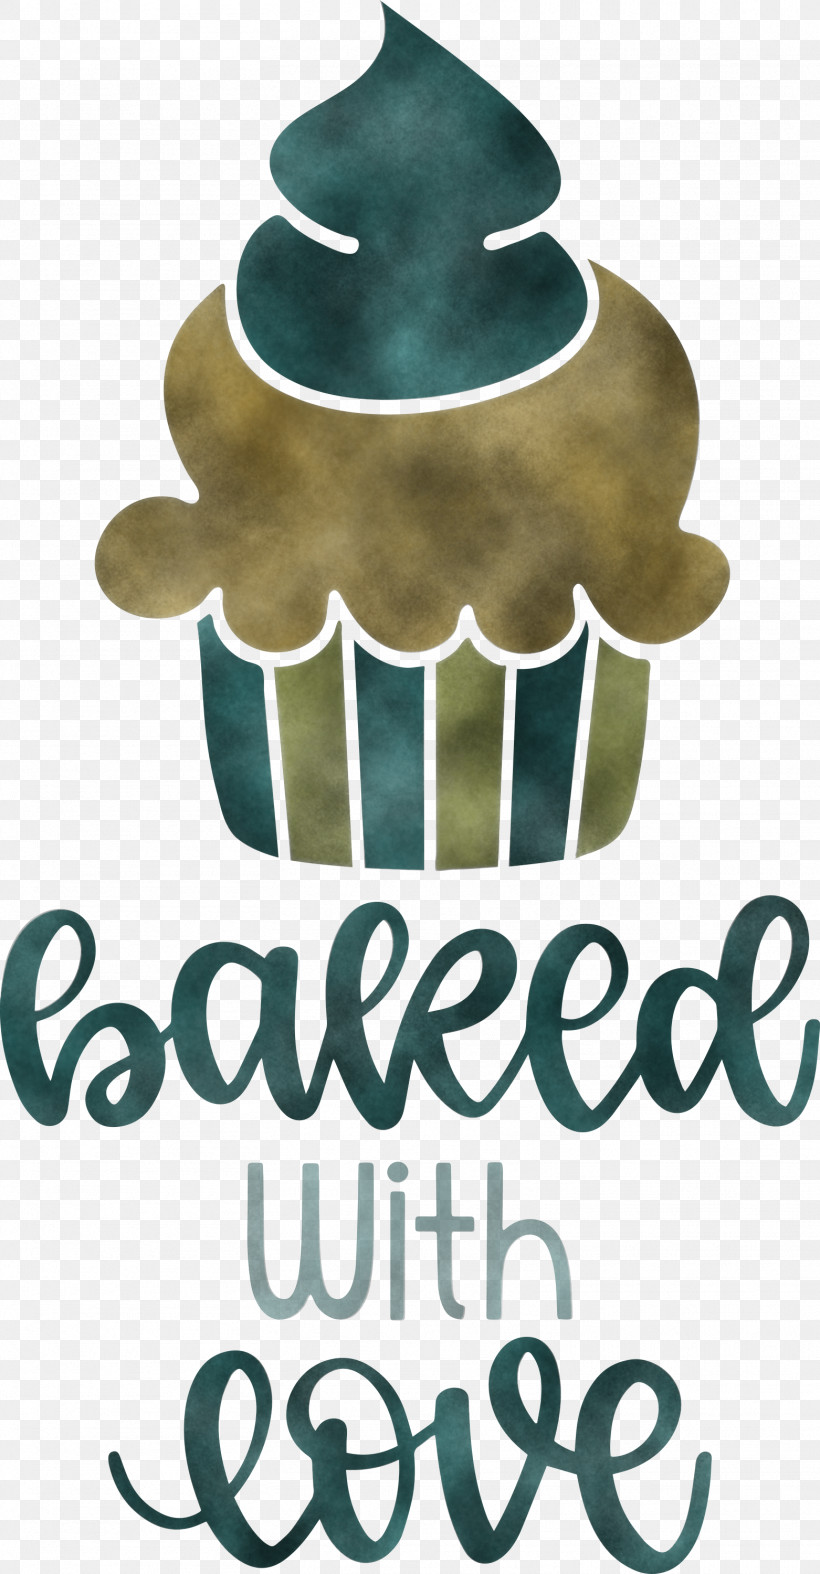 Baked With Love Cupcake Food, PNG, 1562x3000px, Baked With Love, Cupcake, Food, Kitchen, Logo Download Free